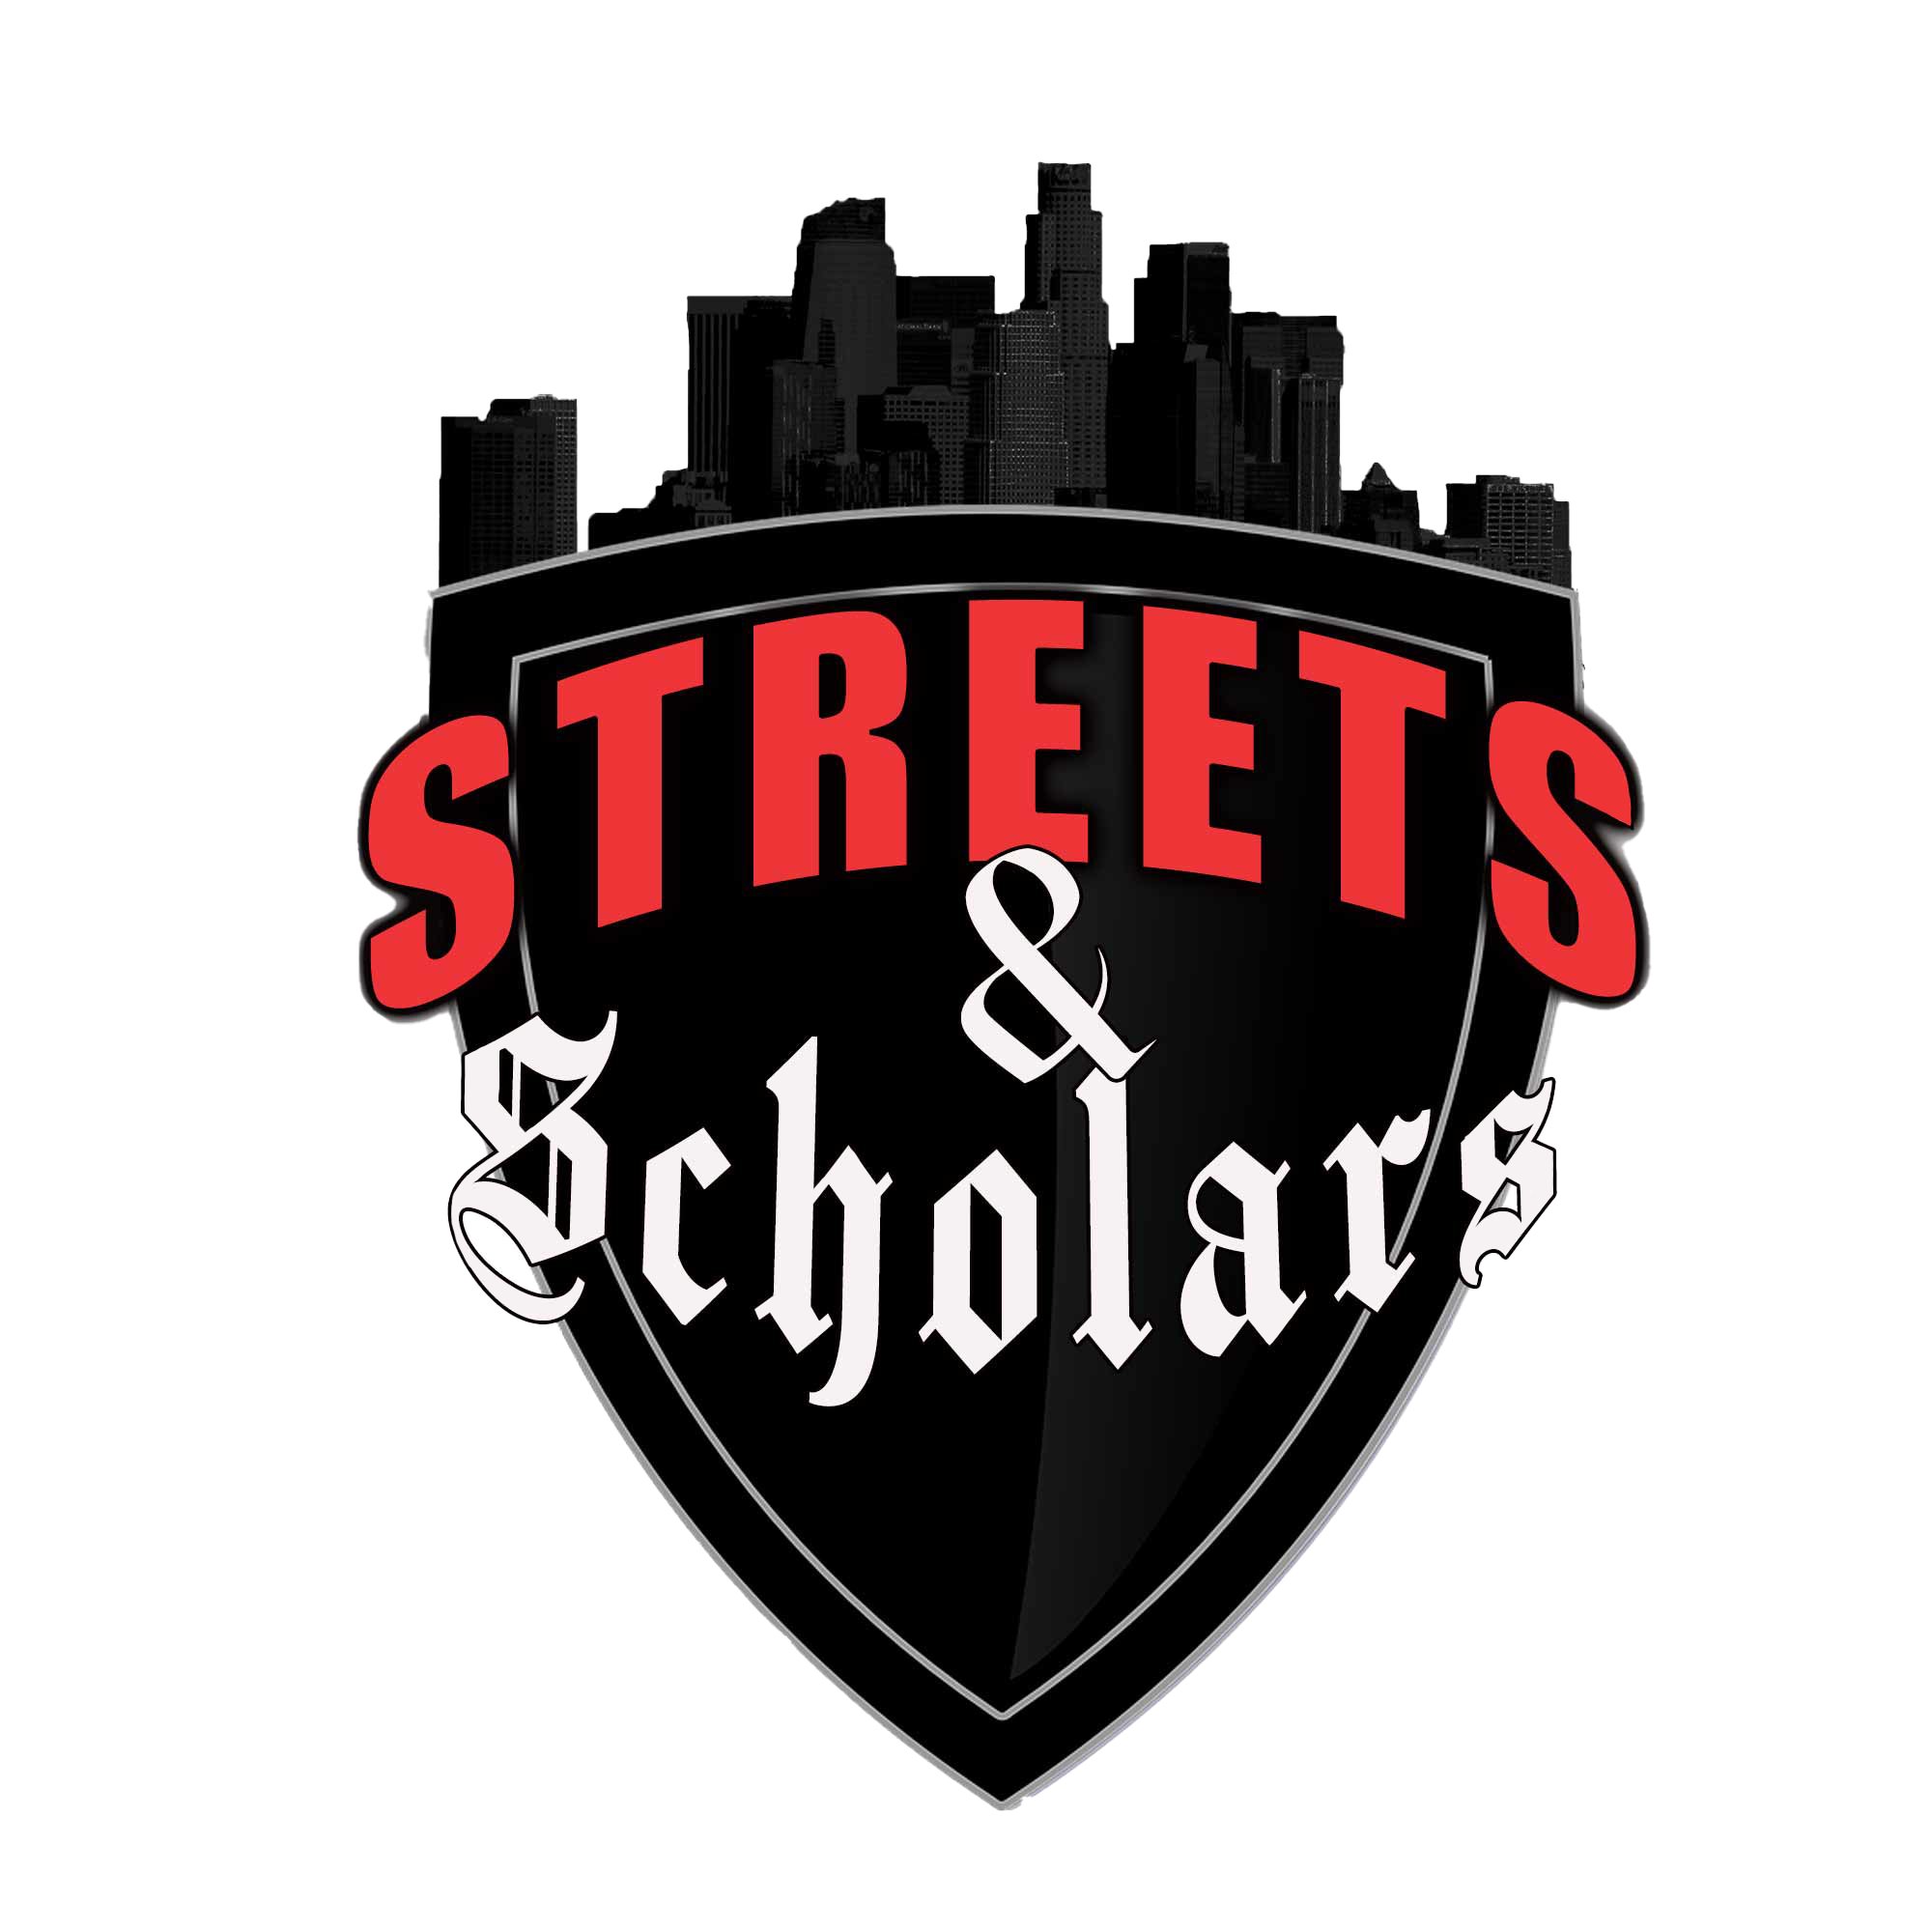 Streets and Scholars